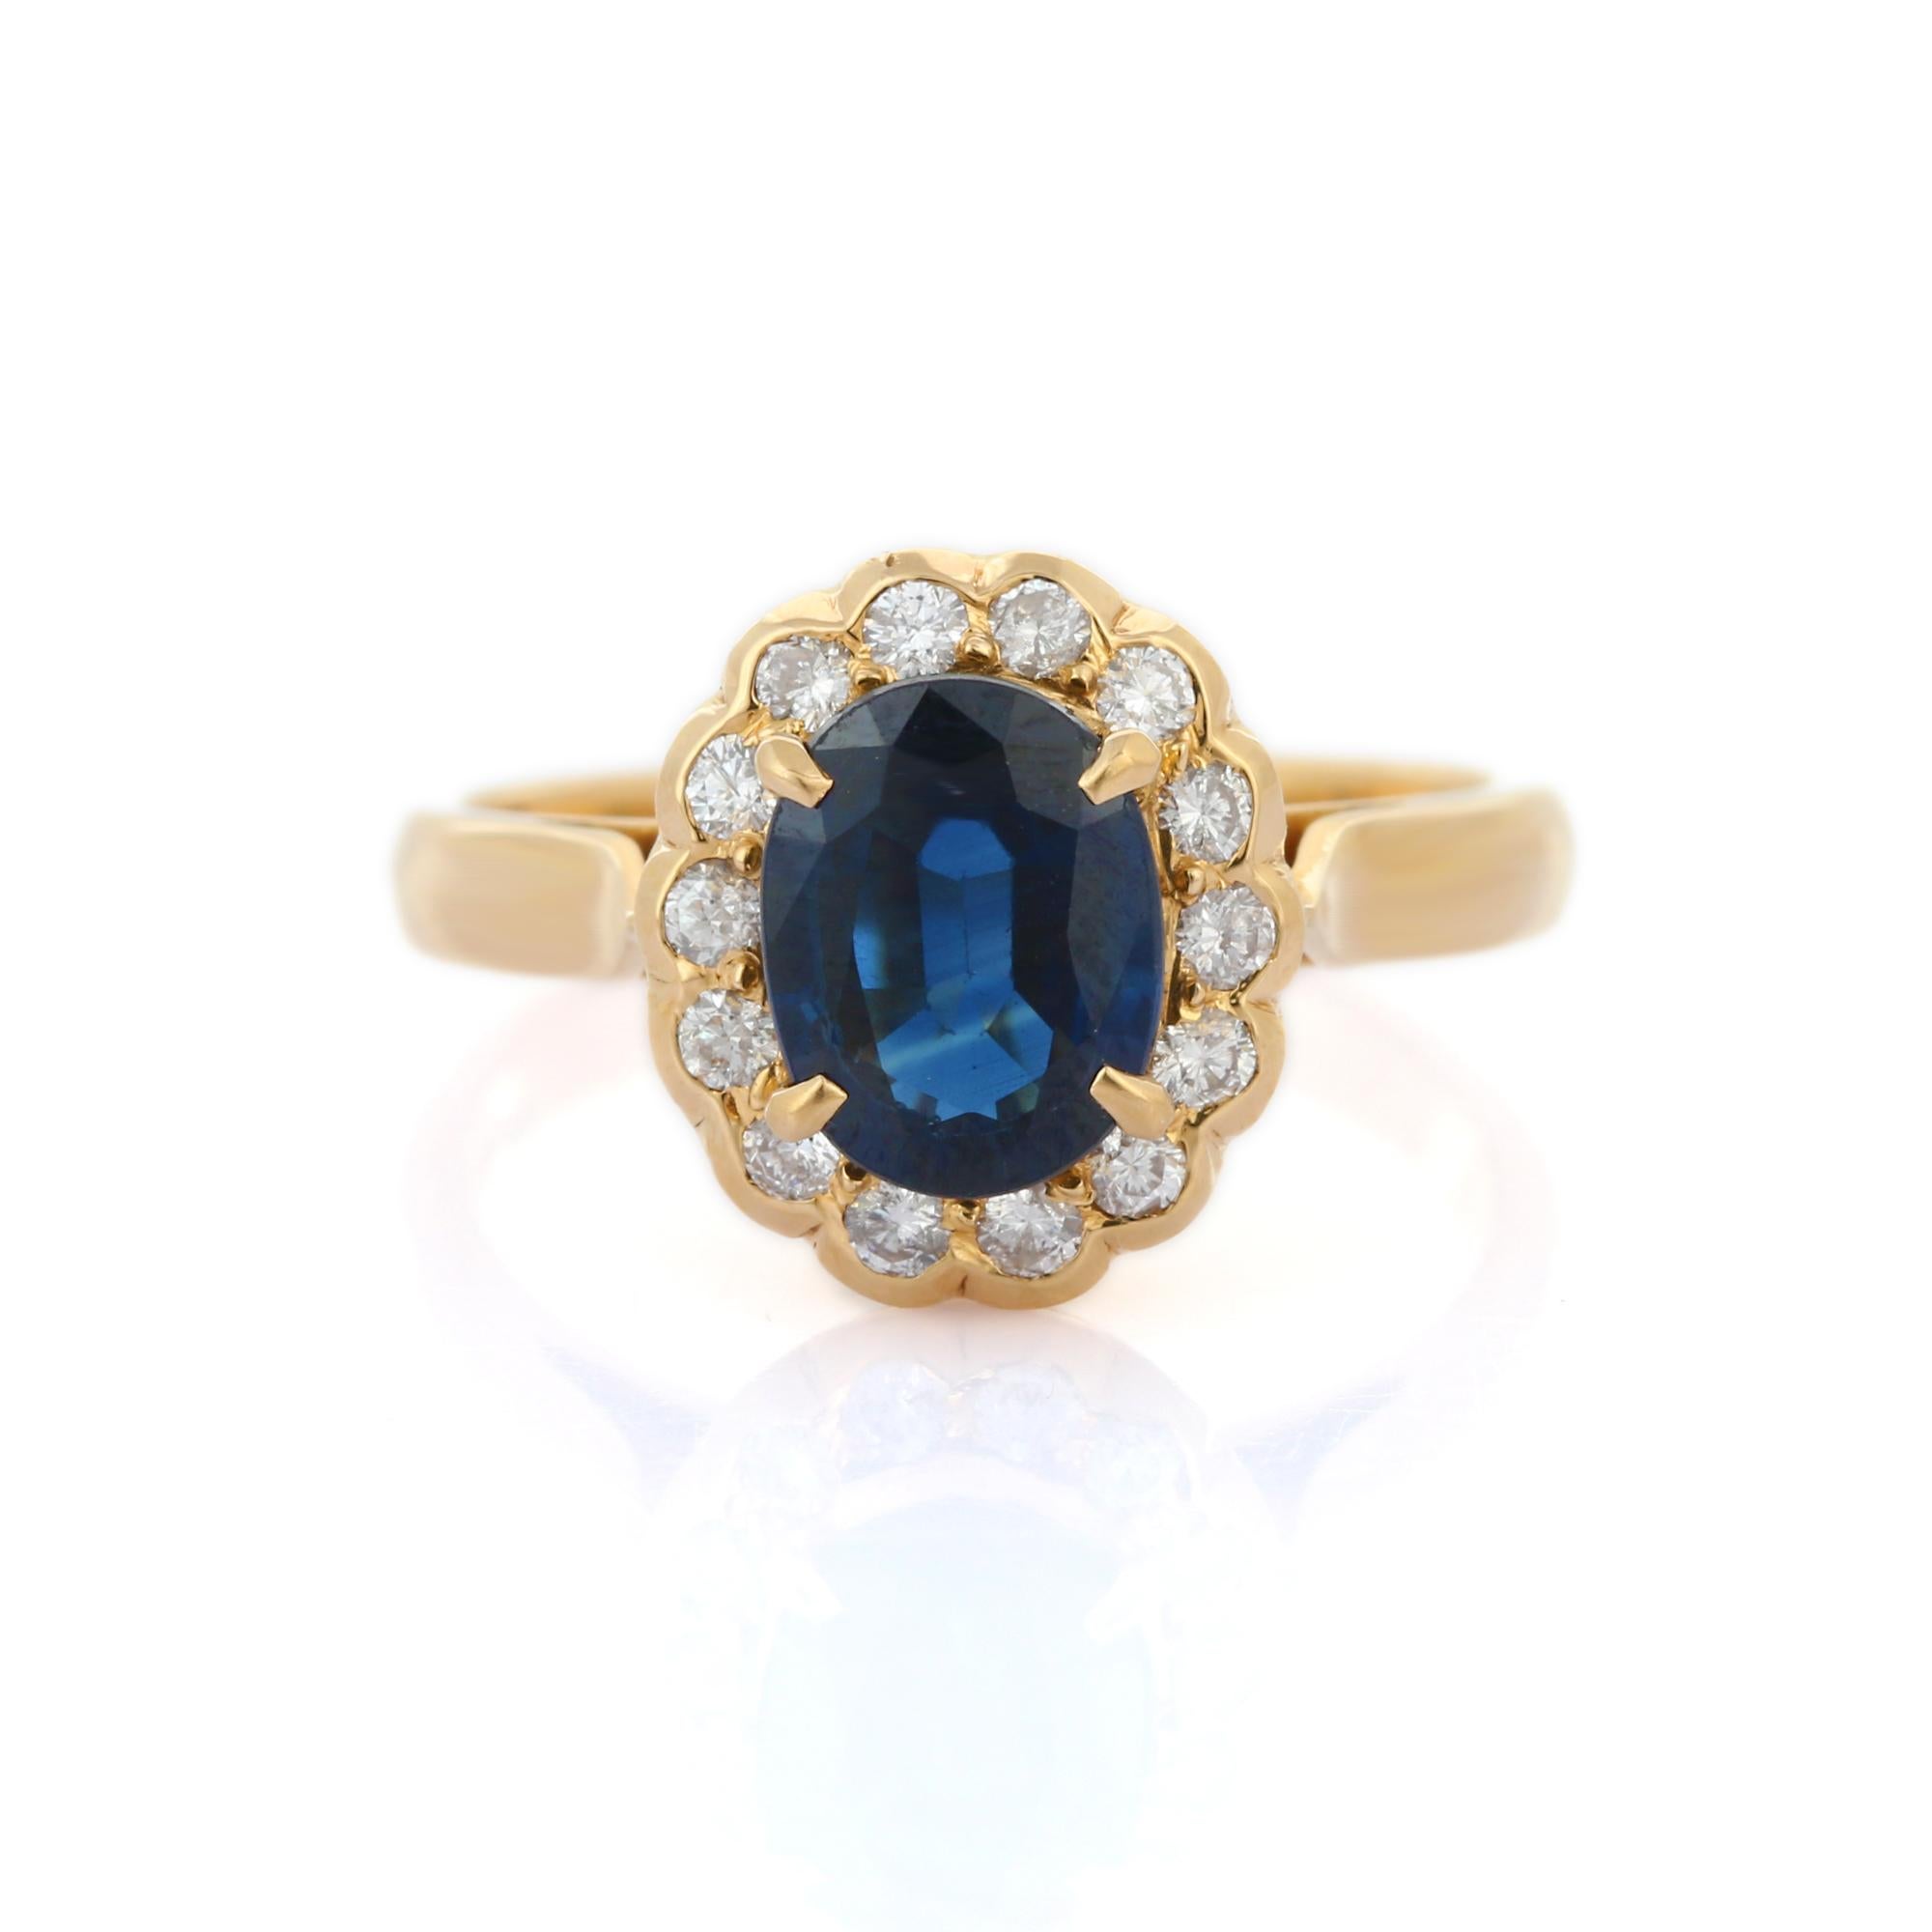 For Sale:  Vivacious 2.2 Ct Blue Sapphire and Diamond Halo Wedding Ring in 18K Yellow Gold 2